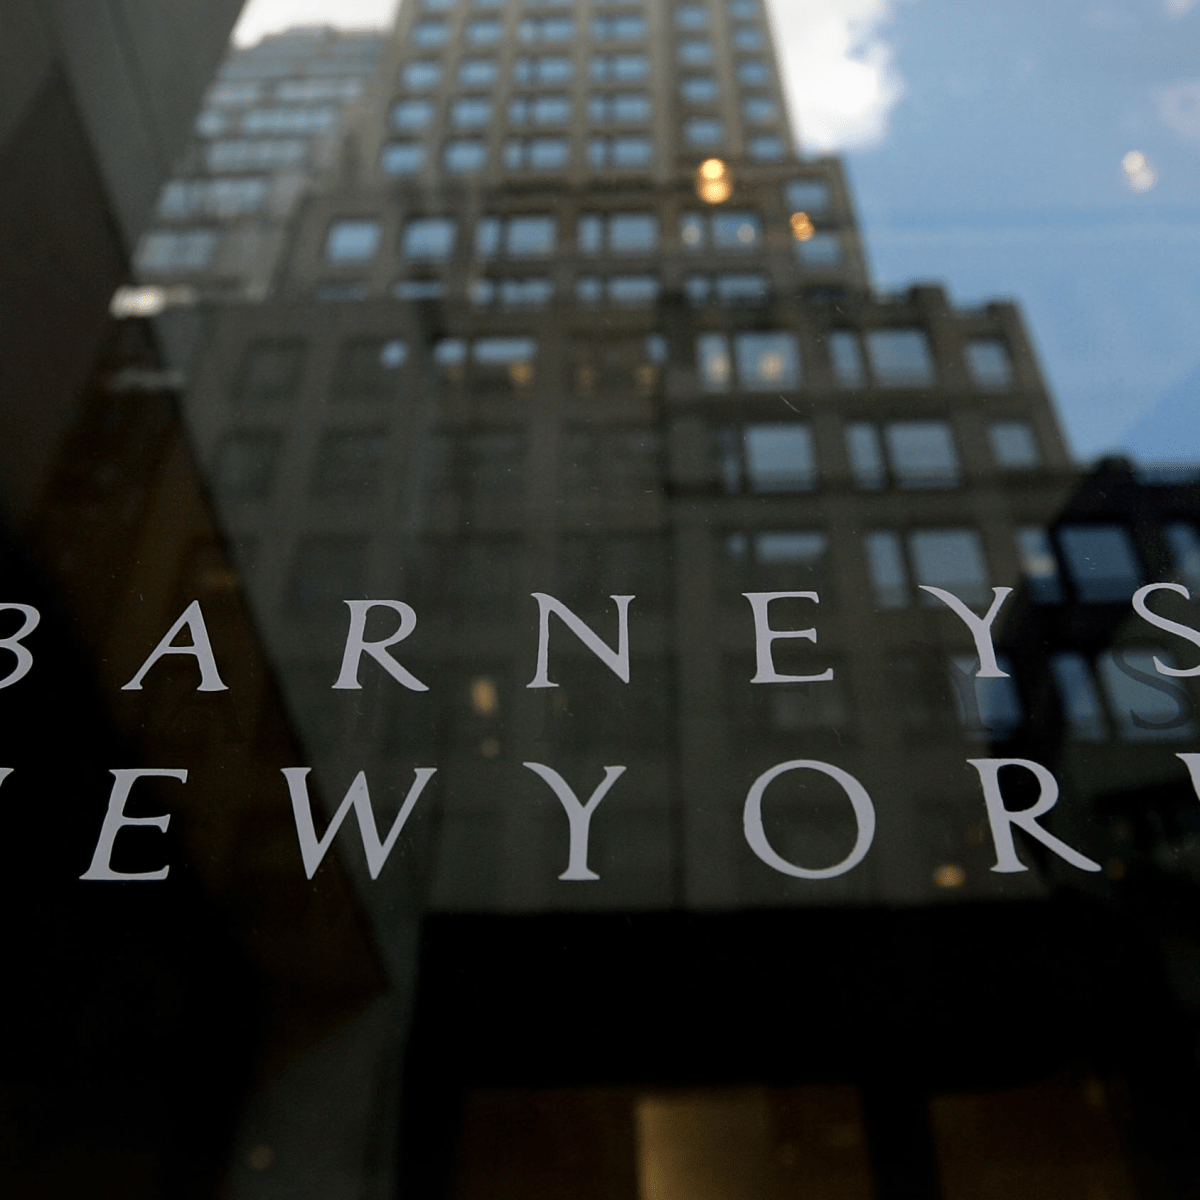 Barneys New York History Includes a Rise and a Fall